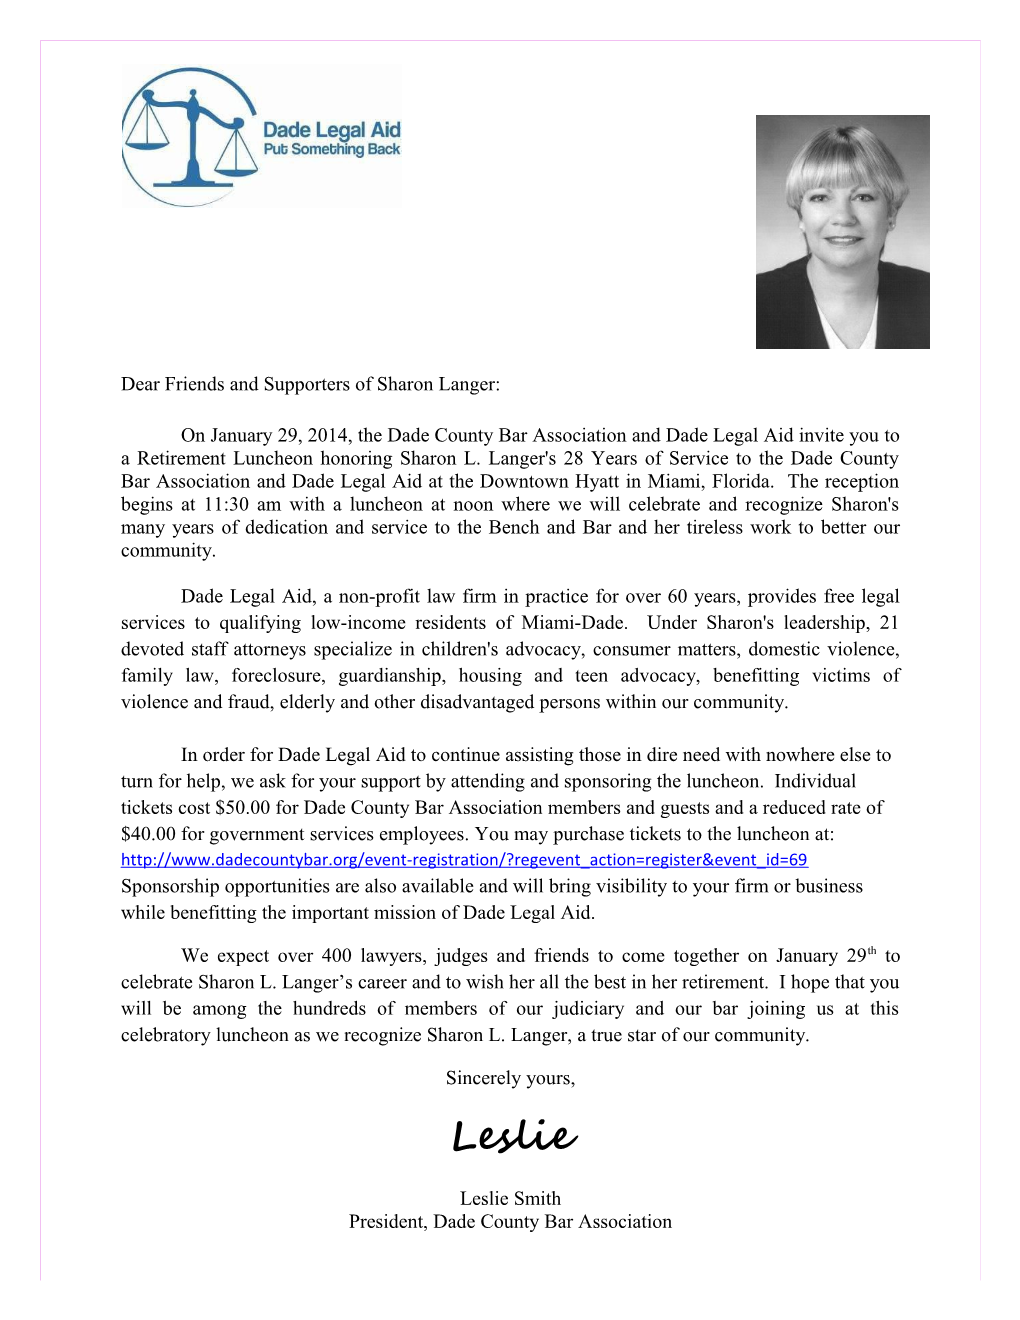 Dear Friends and Supporters of Sharon Langer